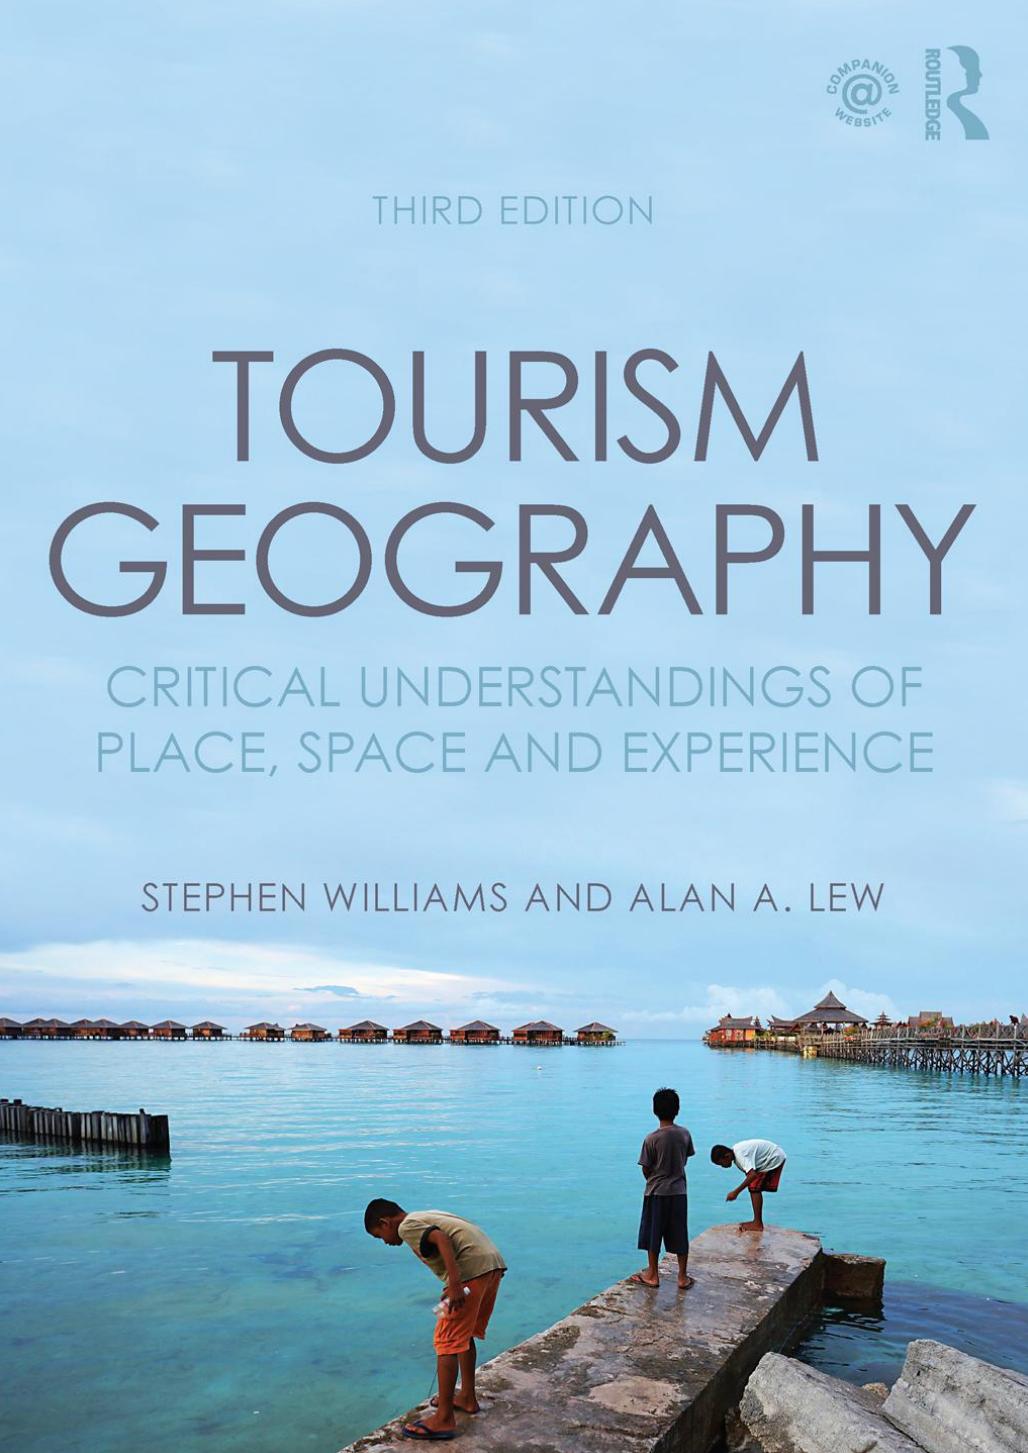 Tourism Geography Critical Understandings of Place, Space and Experience 3rd Edition - Williams, Stephen; Lew, Alan A.;.jpg